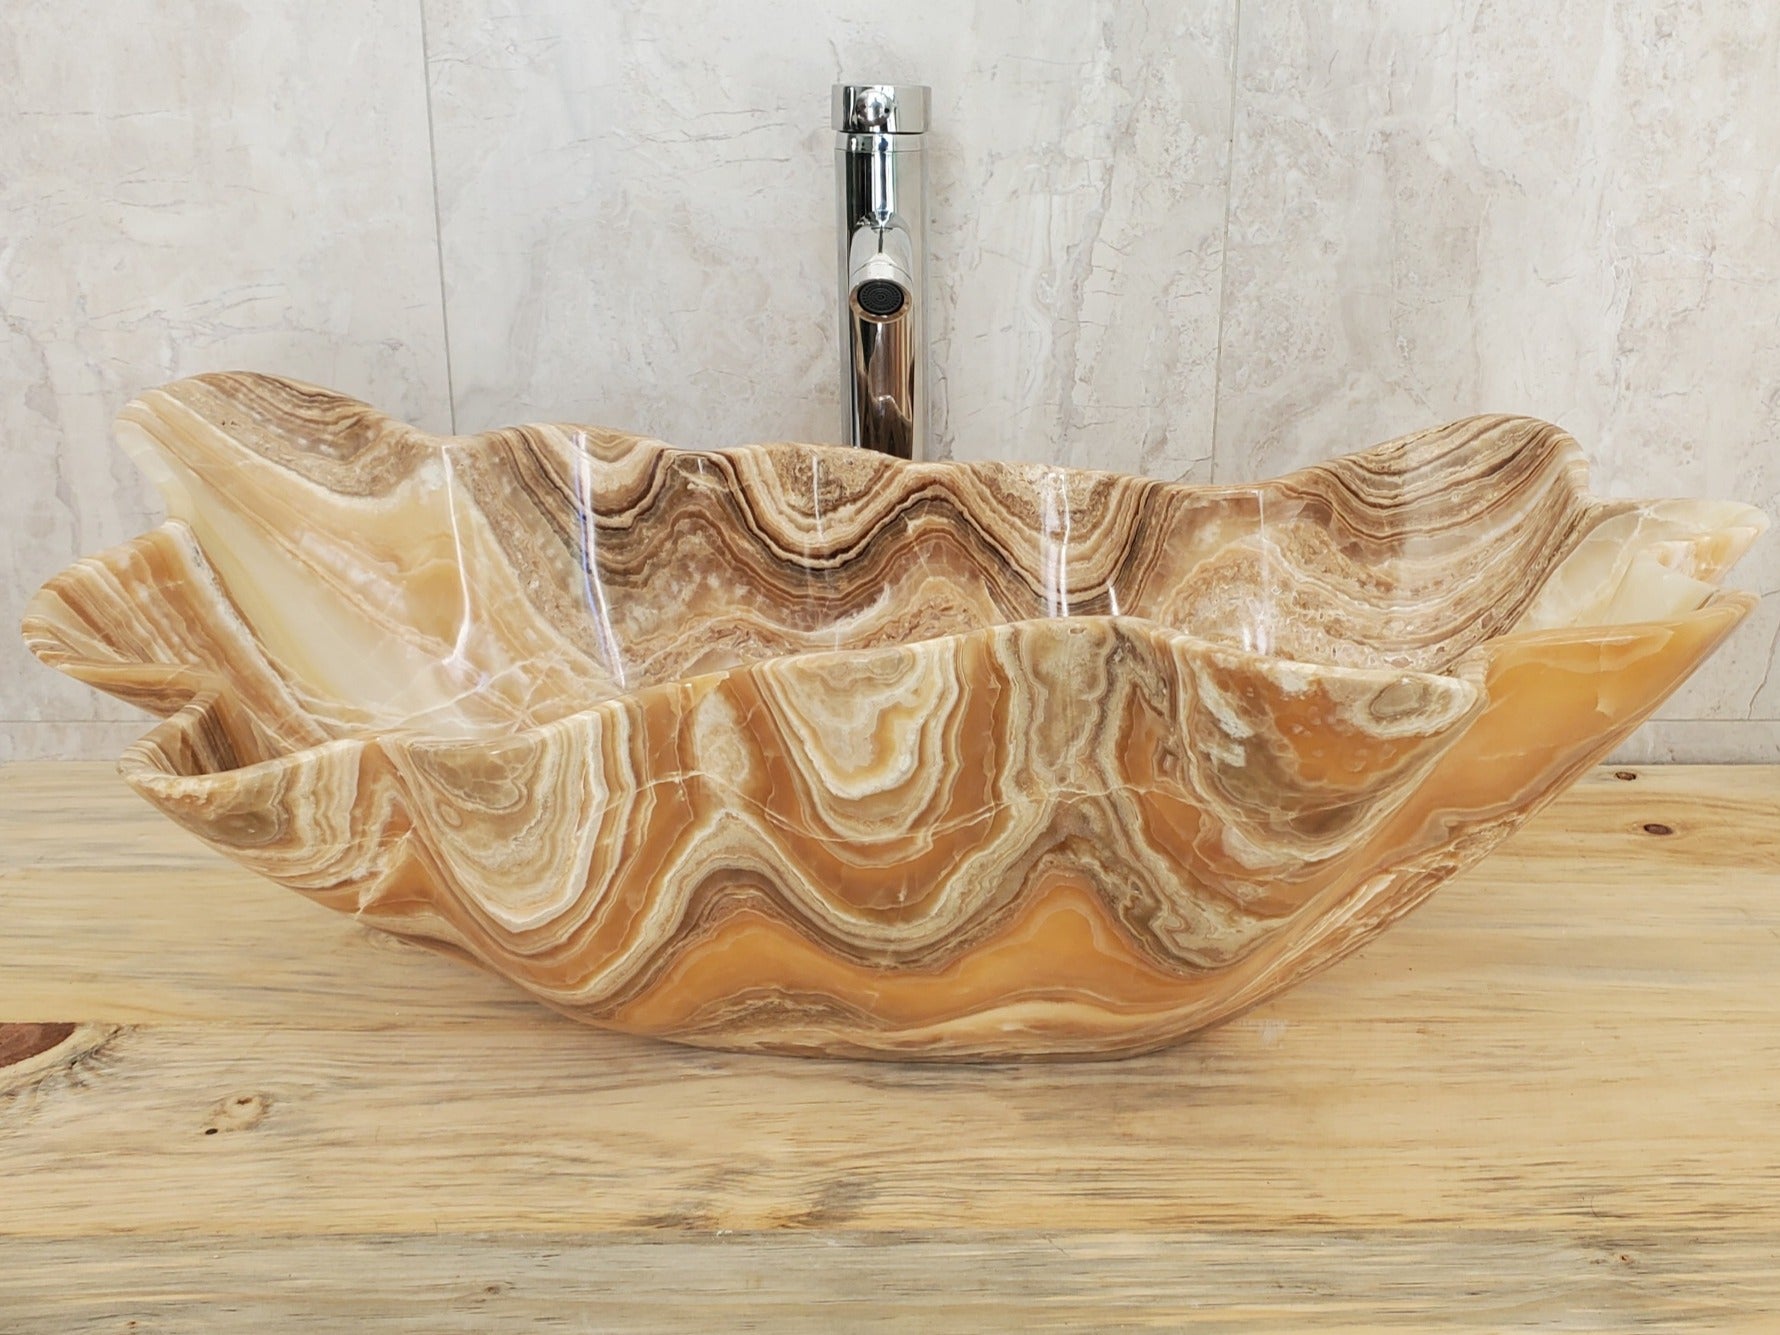 Brown Tan Onyx Stone  Bathroom Vessel Sink. Epoxy Sealant is available with fast shipping. Standard drain size. A beautiful work of rustic art. Handmade. Buy Now at www.felipeandgrace.com.